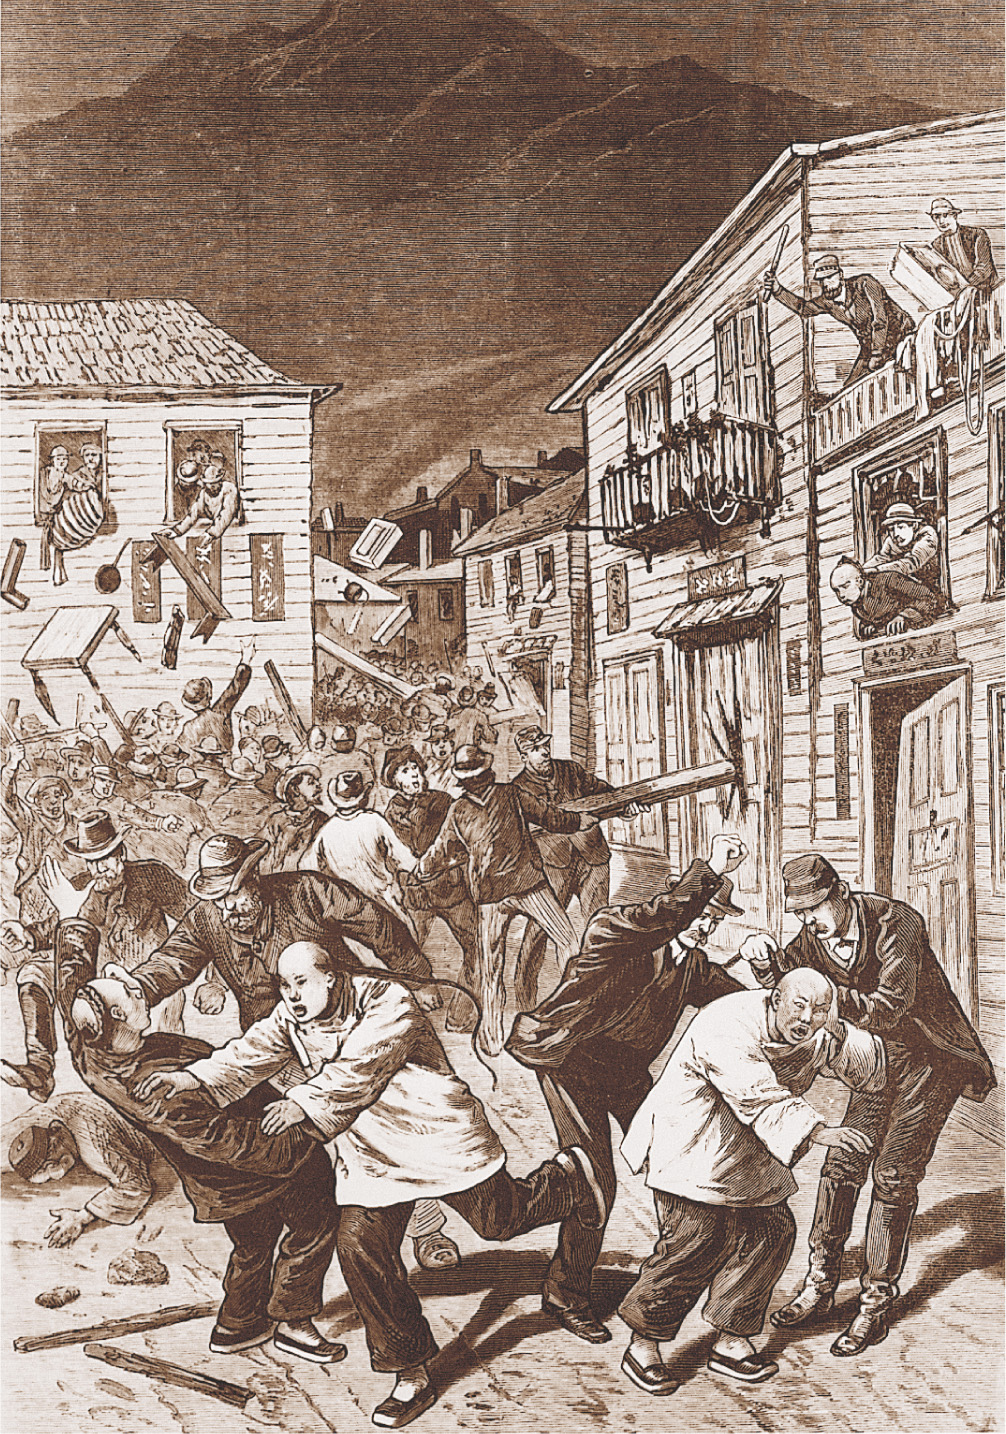 An illustration: a mob of white people attacks Chinese immigrants in the street, and smashes open doors.